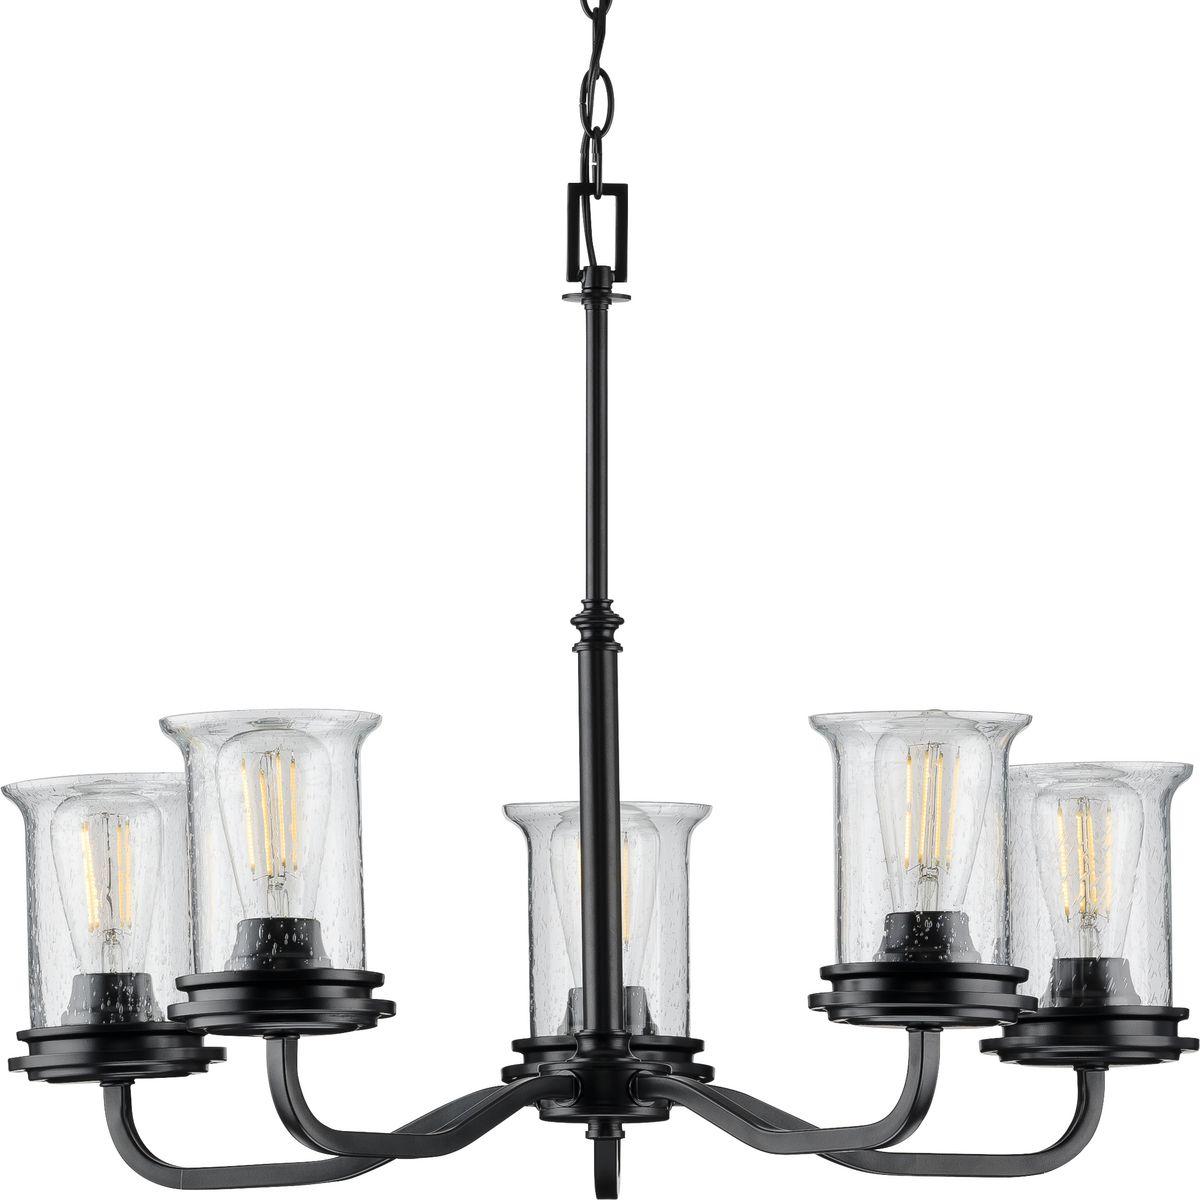 Hubbell P400206-031 Immerse yourself in a home atmosphere primed for relaxation and inspired thinking with the beautiful craftsmanship of this five-light chandelier. Savor this fresh take on a classic light choice as your gaze traces graceful arms and clean crisp lines coate